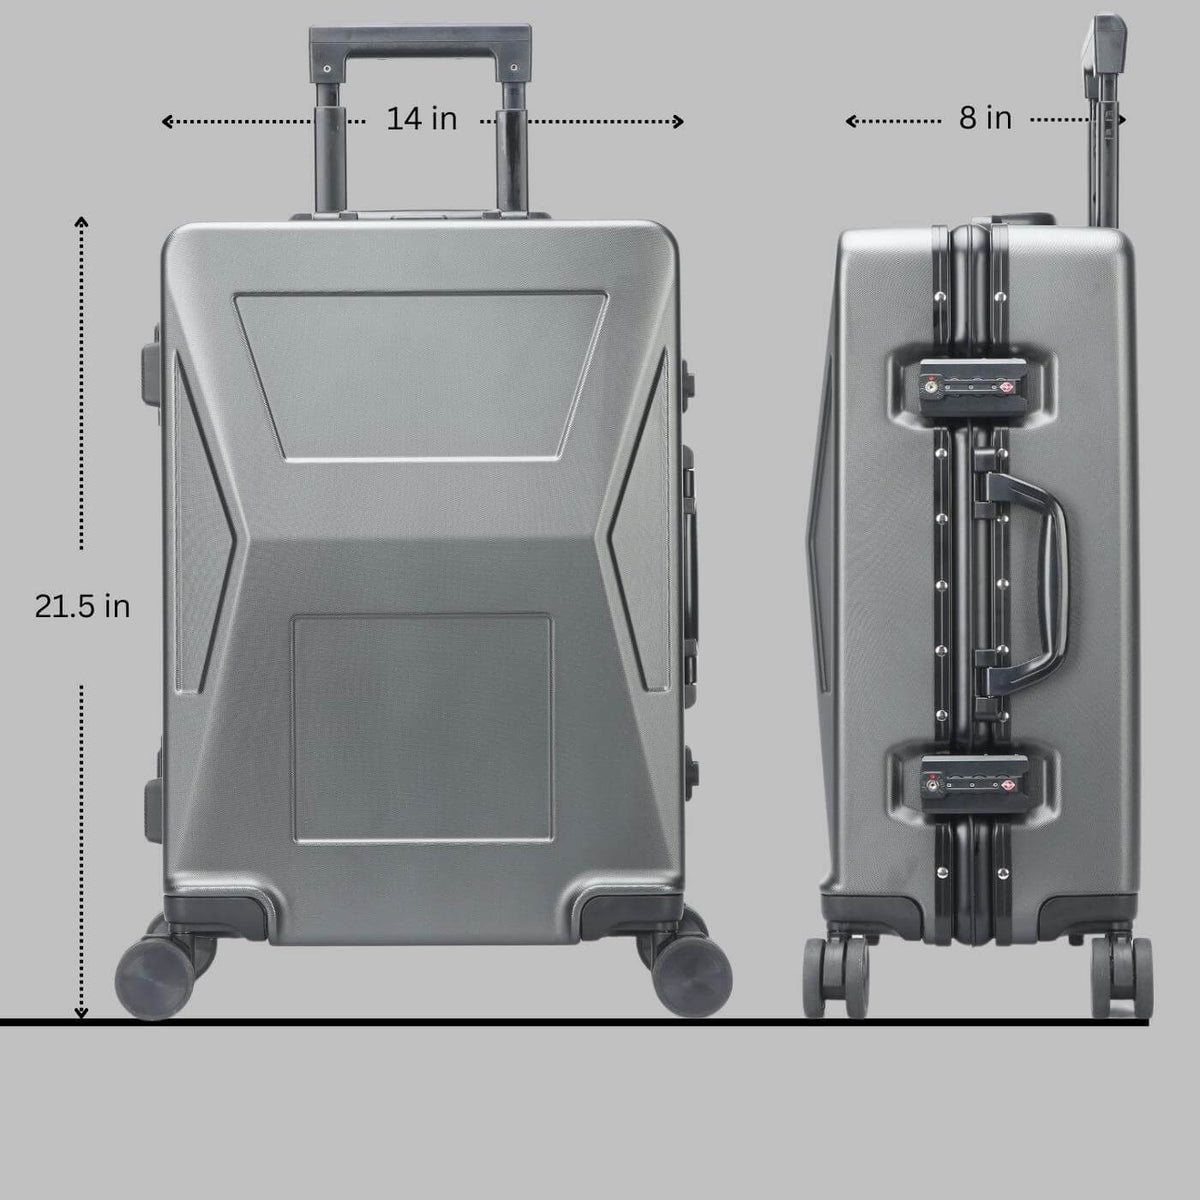 Maximizing Convenience and Versatility with the Cyberluggage's Measurements